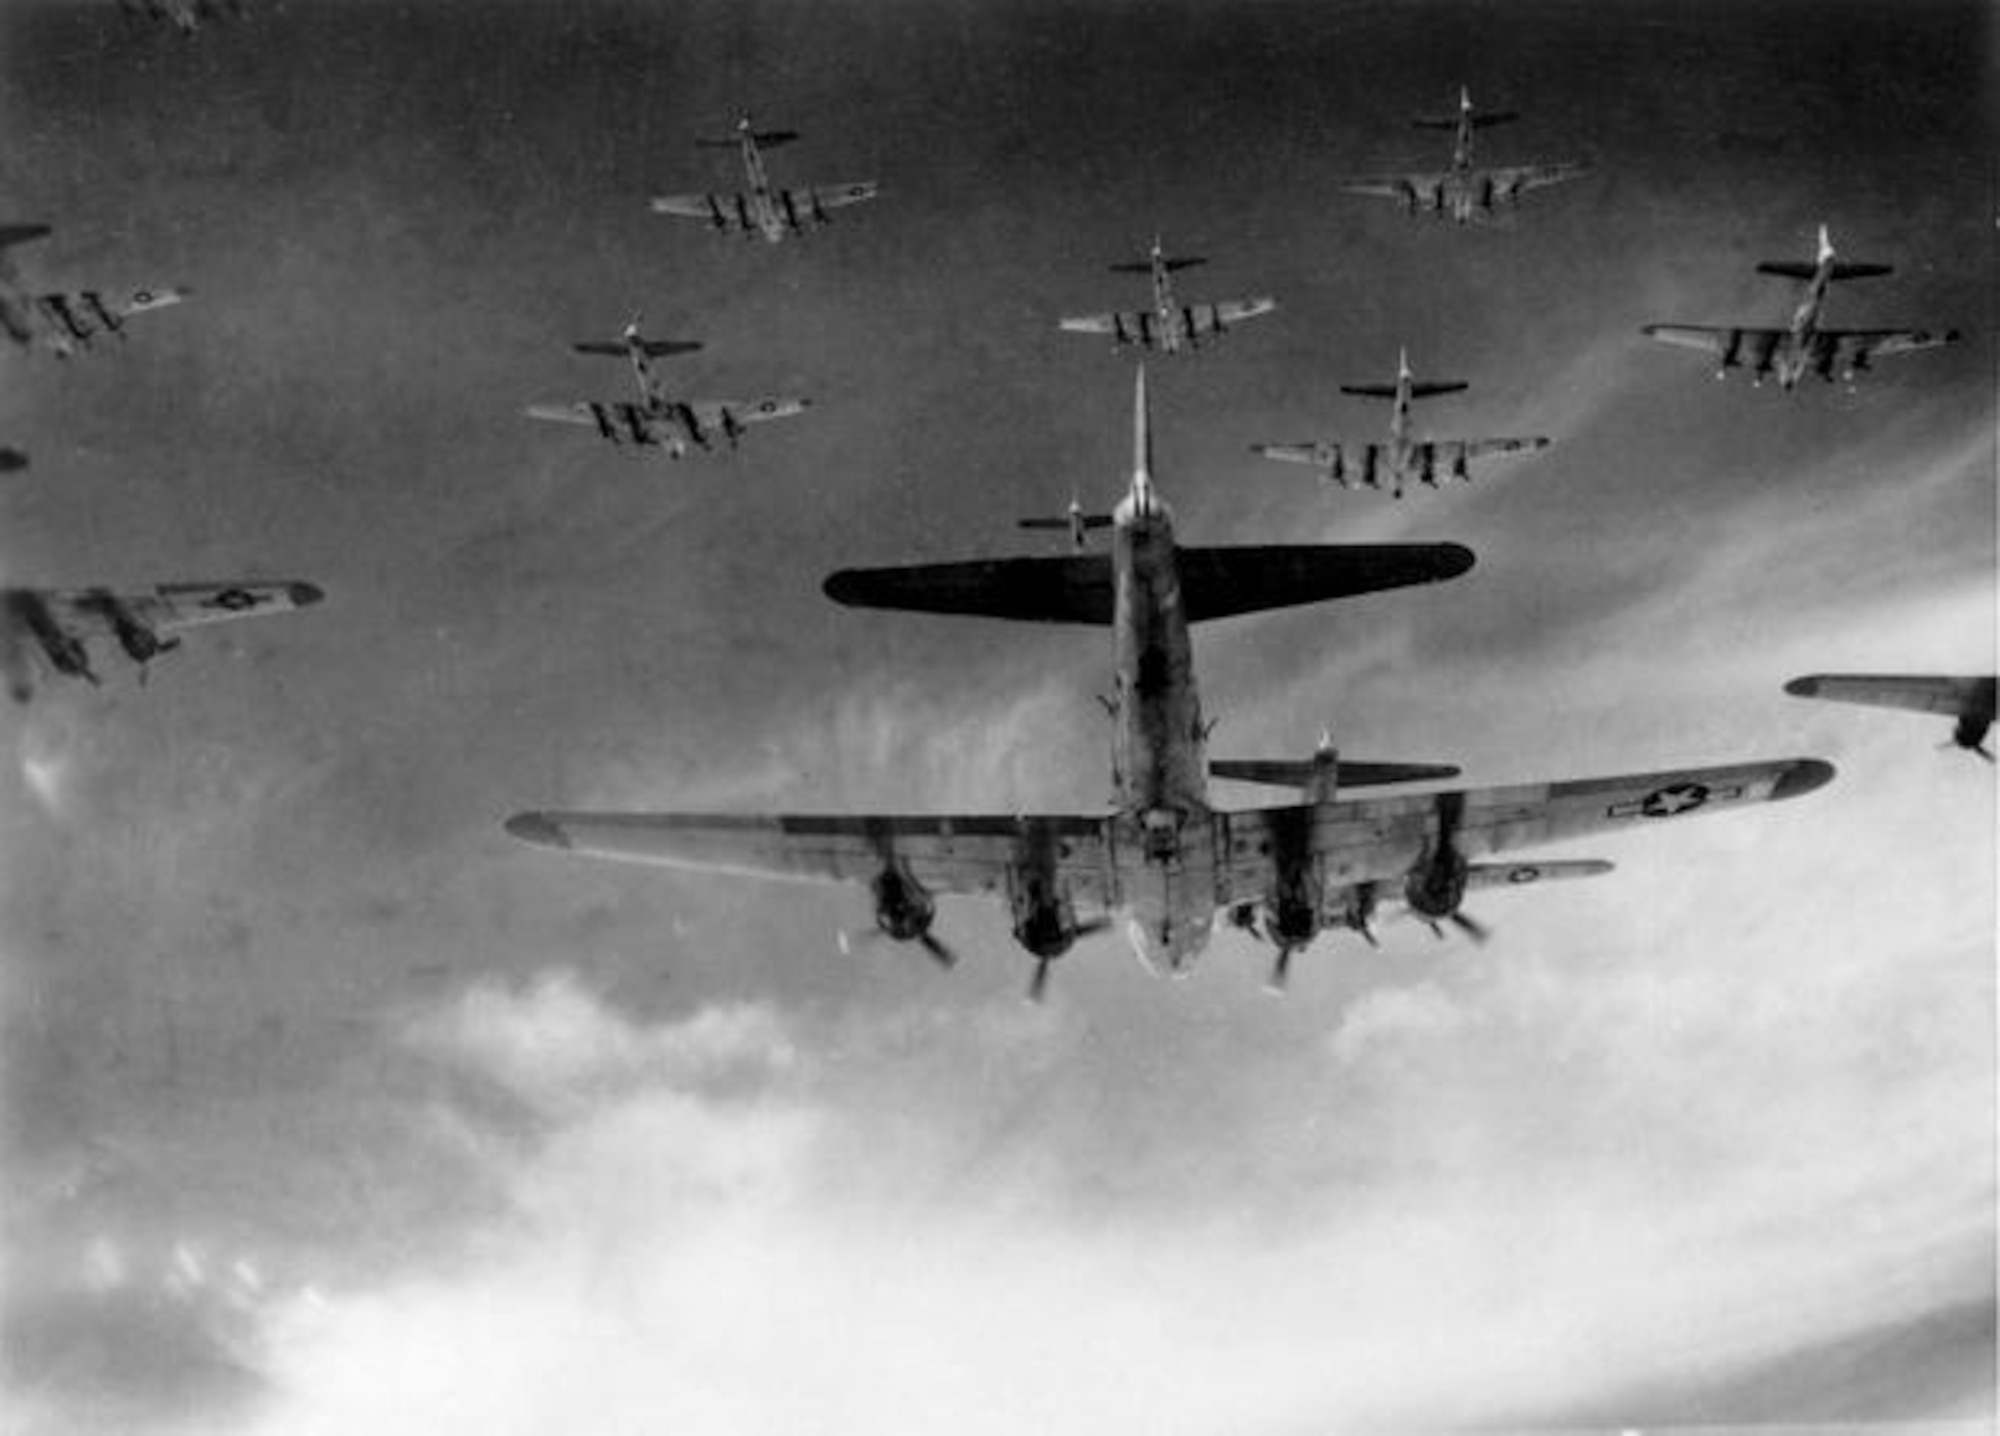 A formation of B-17 Flying Fortress aircraft on the way to bomb industrial targets in Germany, early 1944. Starting in late 1942 through October 1943, B-17s, along with B-24 Liberator strategic bombers conducted unescorted daylight precision bombing raids on German industrial targets. However, these raids temporarily ceased after the disastrous unescorted raids in August and October 1943 produced unsustainable aircraft and aircrew losses. (U.S. Air Force photo)